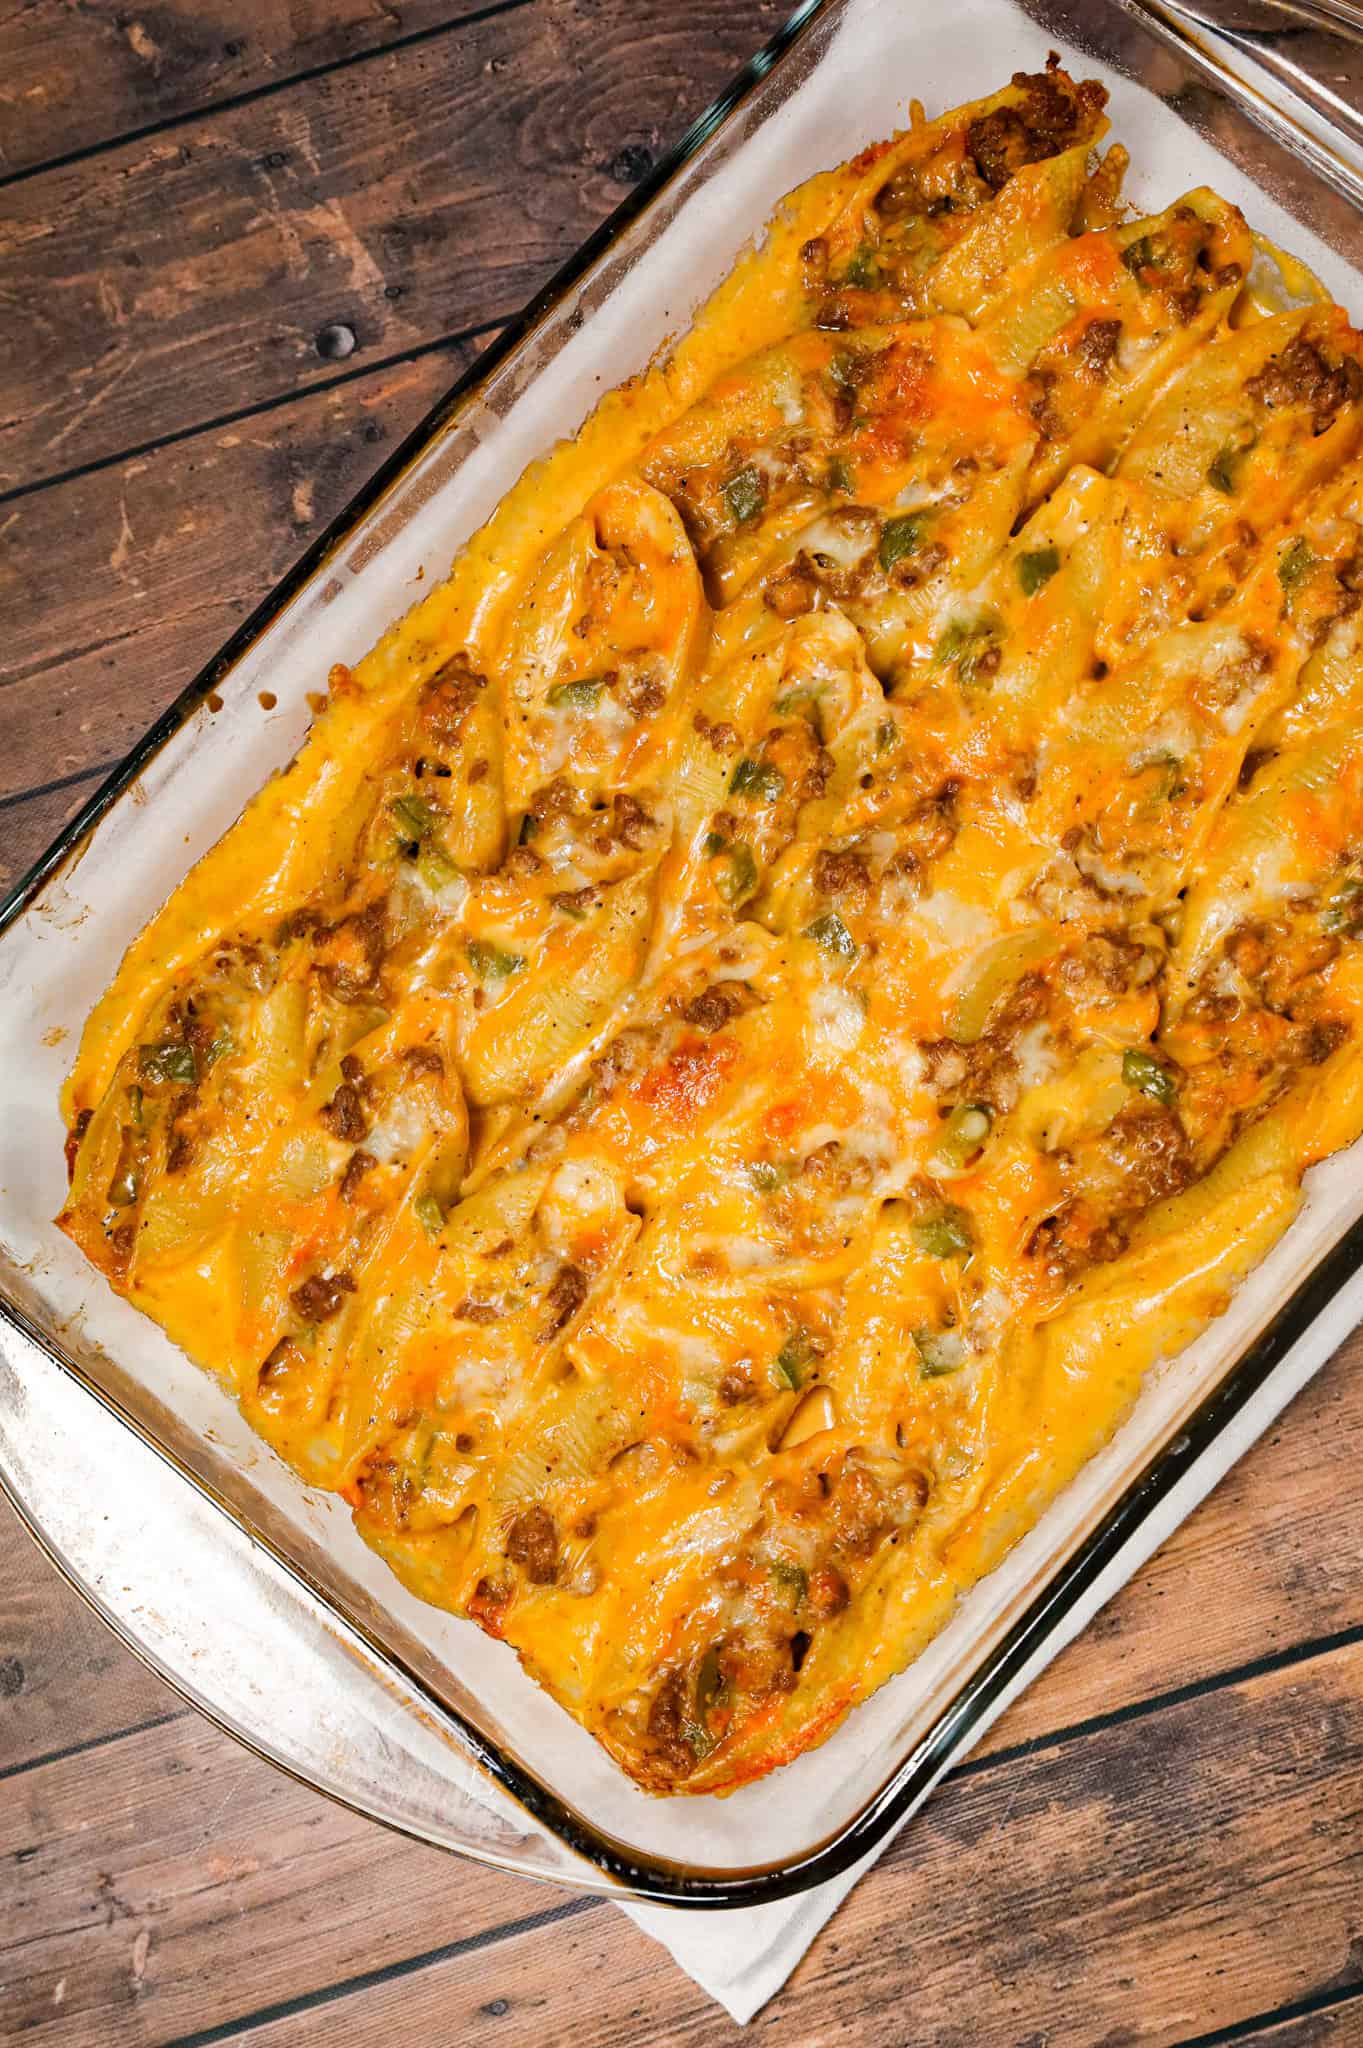 Philly Cheese Steak Stuffed Shells are a hearty pasta recipe loaded with ground beef, diced onions, green peppers, brown gravy mix, cheddar soup and shredded cheddar cheese.